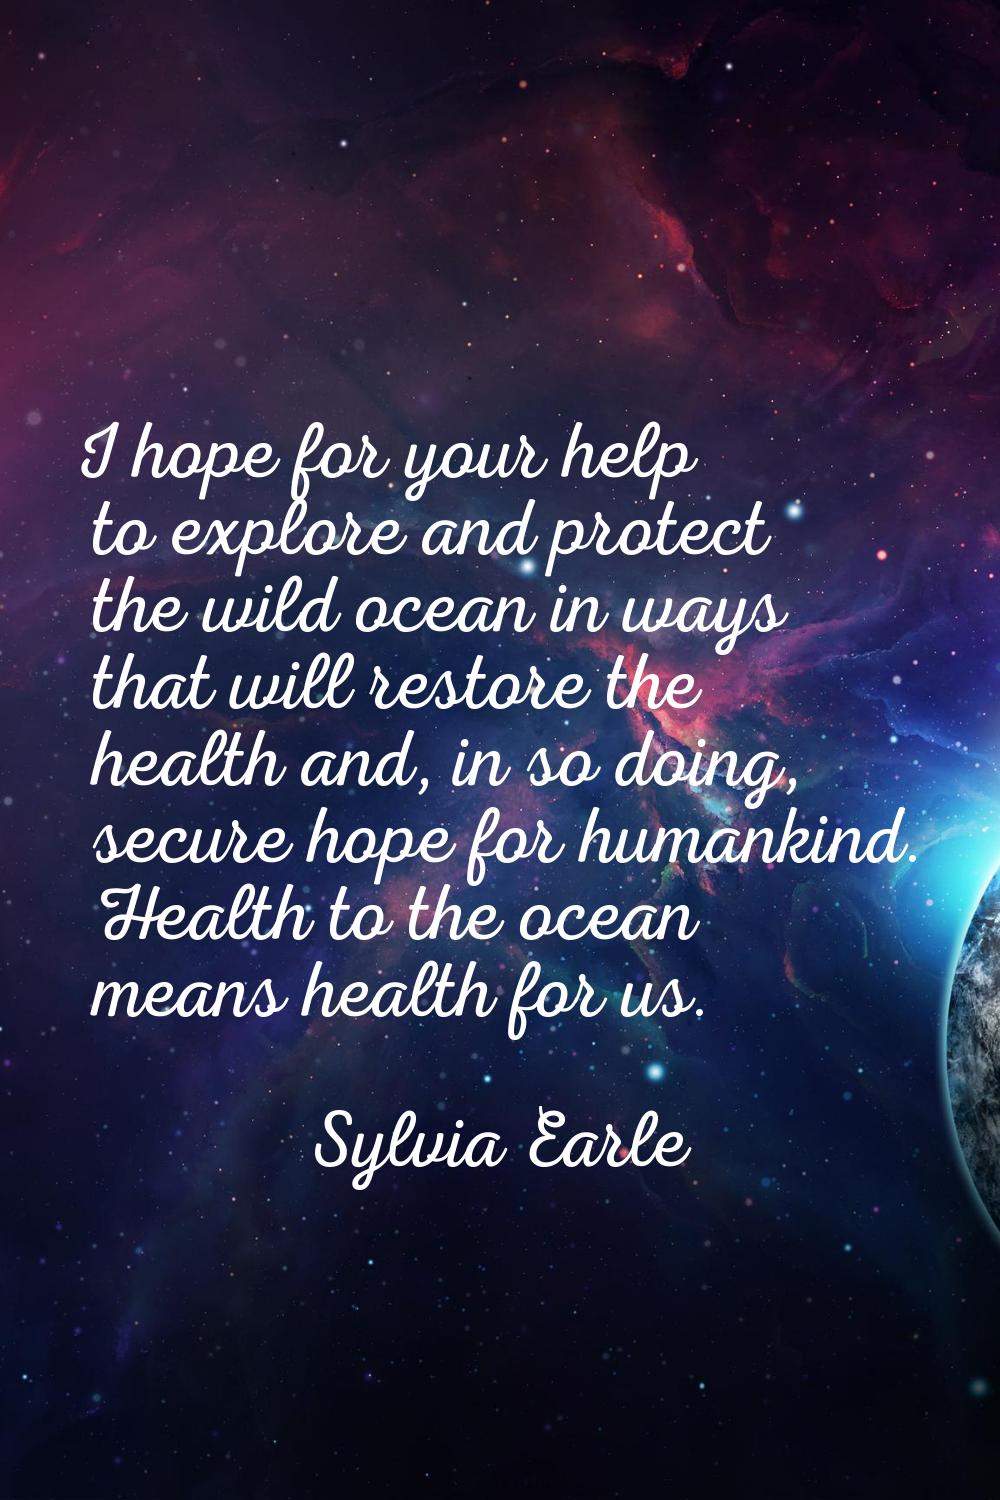 I hope for your help to explore and protect the wild ocean in ways that will restore the health and